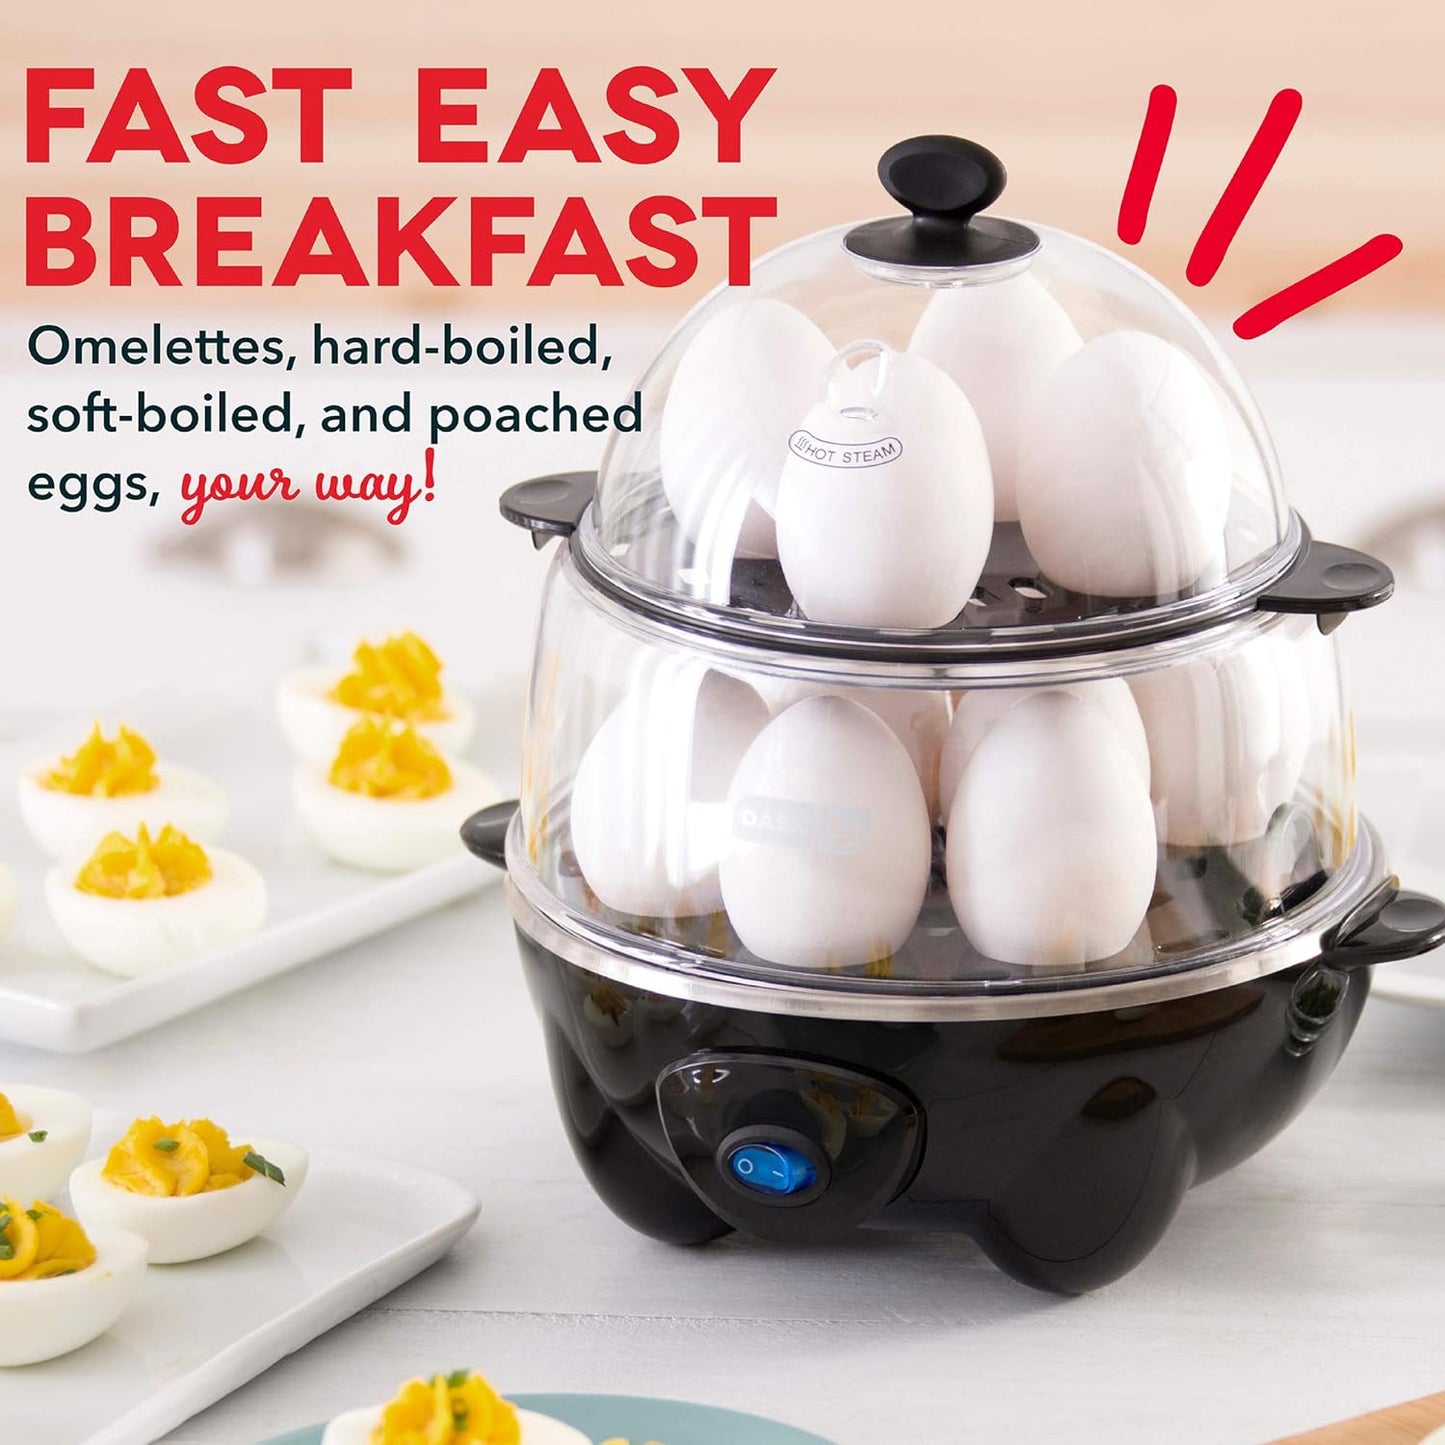 DASH Electric Rapid Egg Cooker